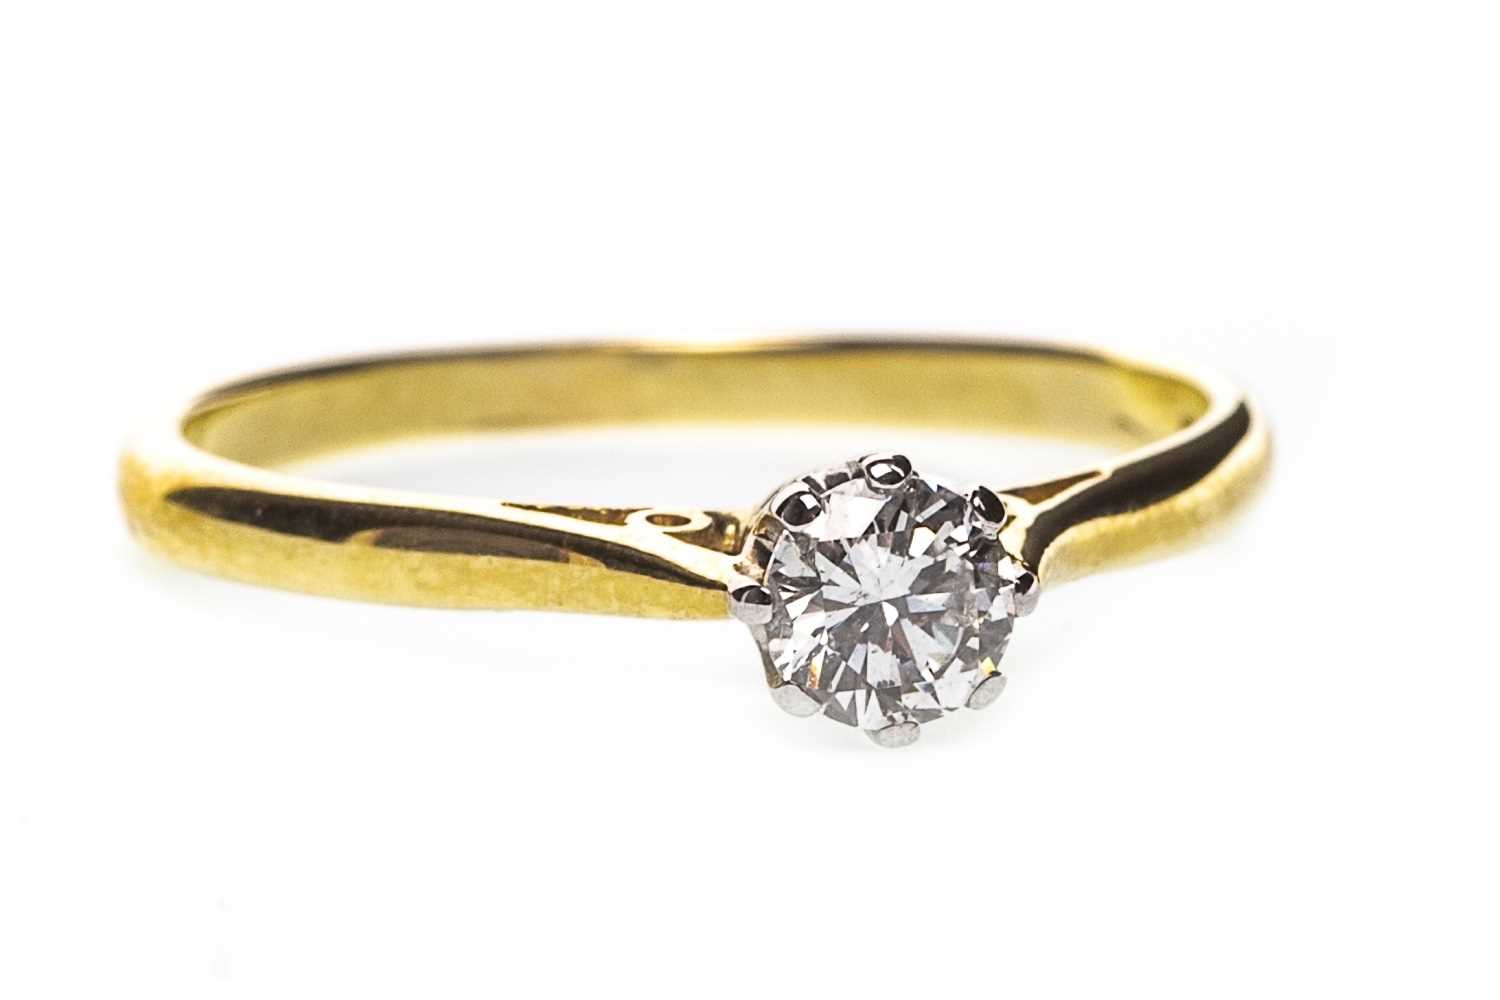 Lot 91 - A DIAMOND SOLITAIRE RING